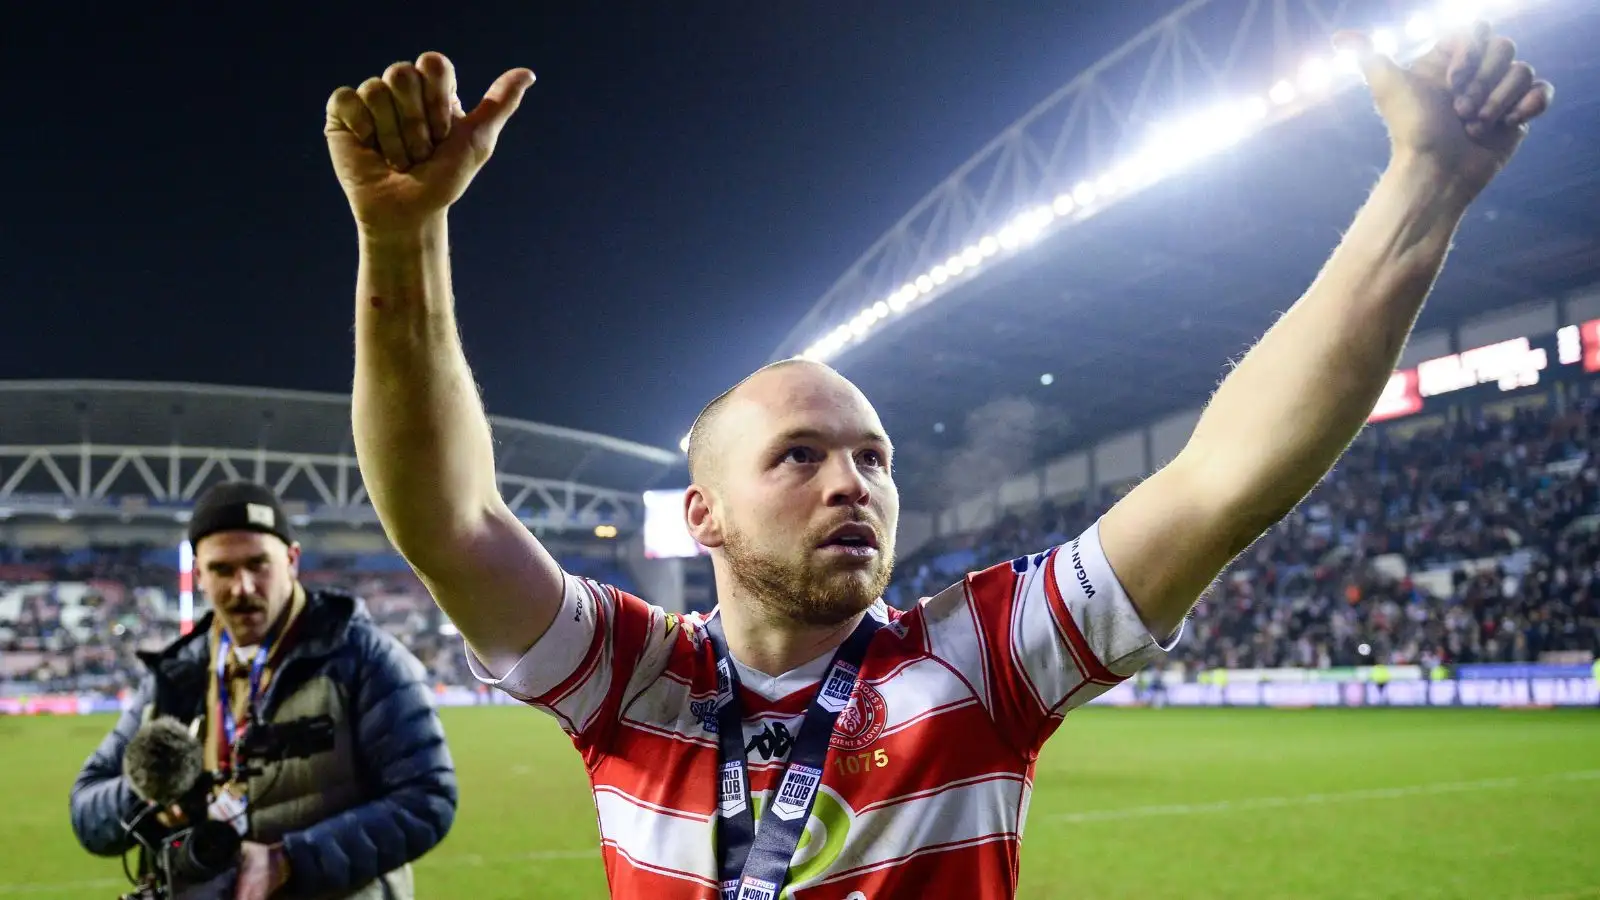 The Debrief: Wigan Warriors’ strength in depth, Huddersfield Giants jigsaw, Liam Marshall for England?